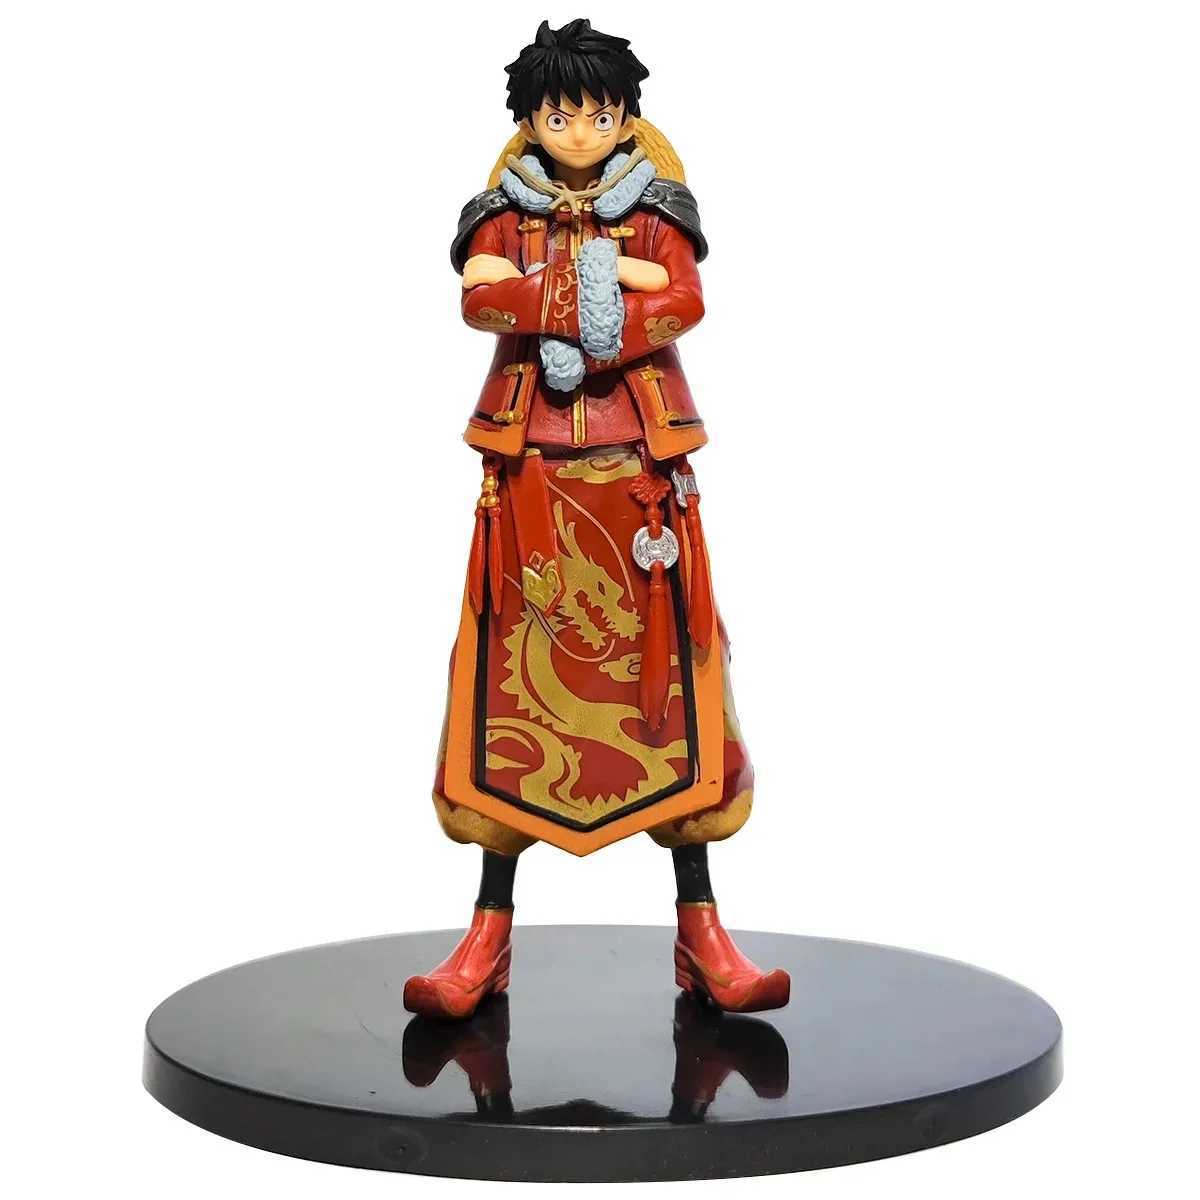 Comics Heroes Anime One Piece Figure Zoro Luffy PVC Statue Action Figure Monkey D Luffy Chinese Style Model Toy For Kids Christmas Gift 240413